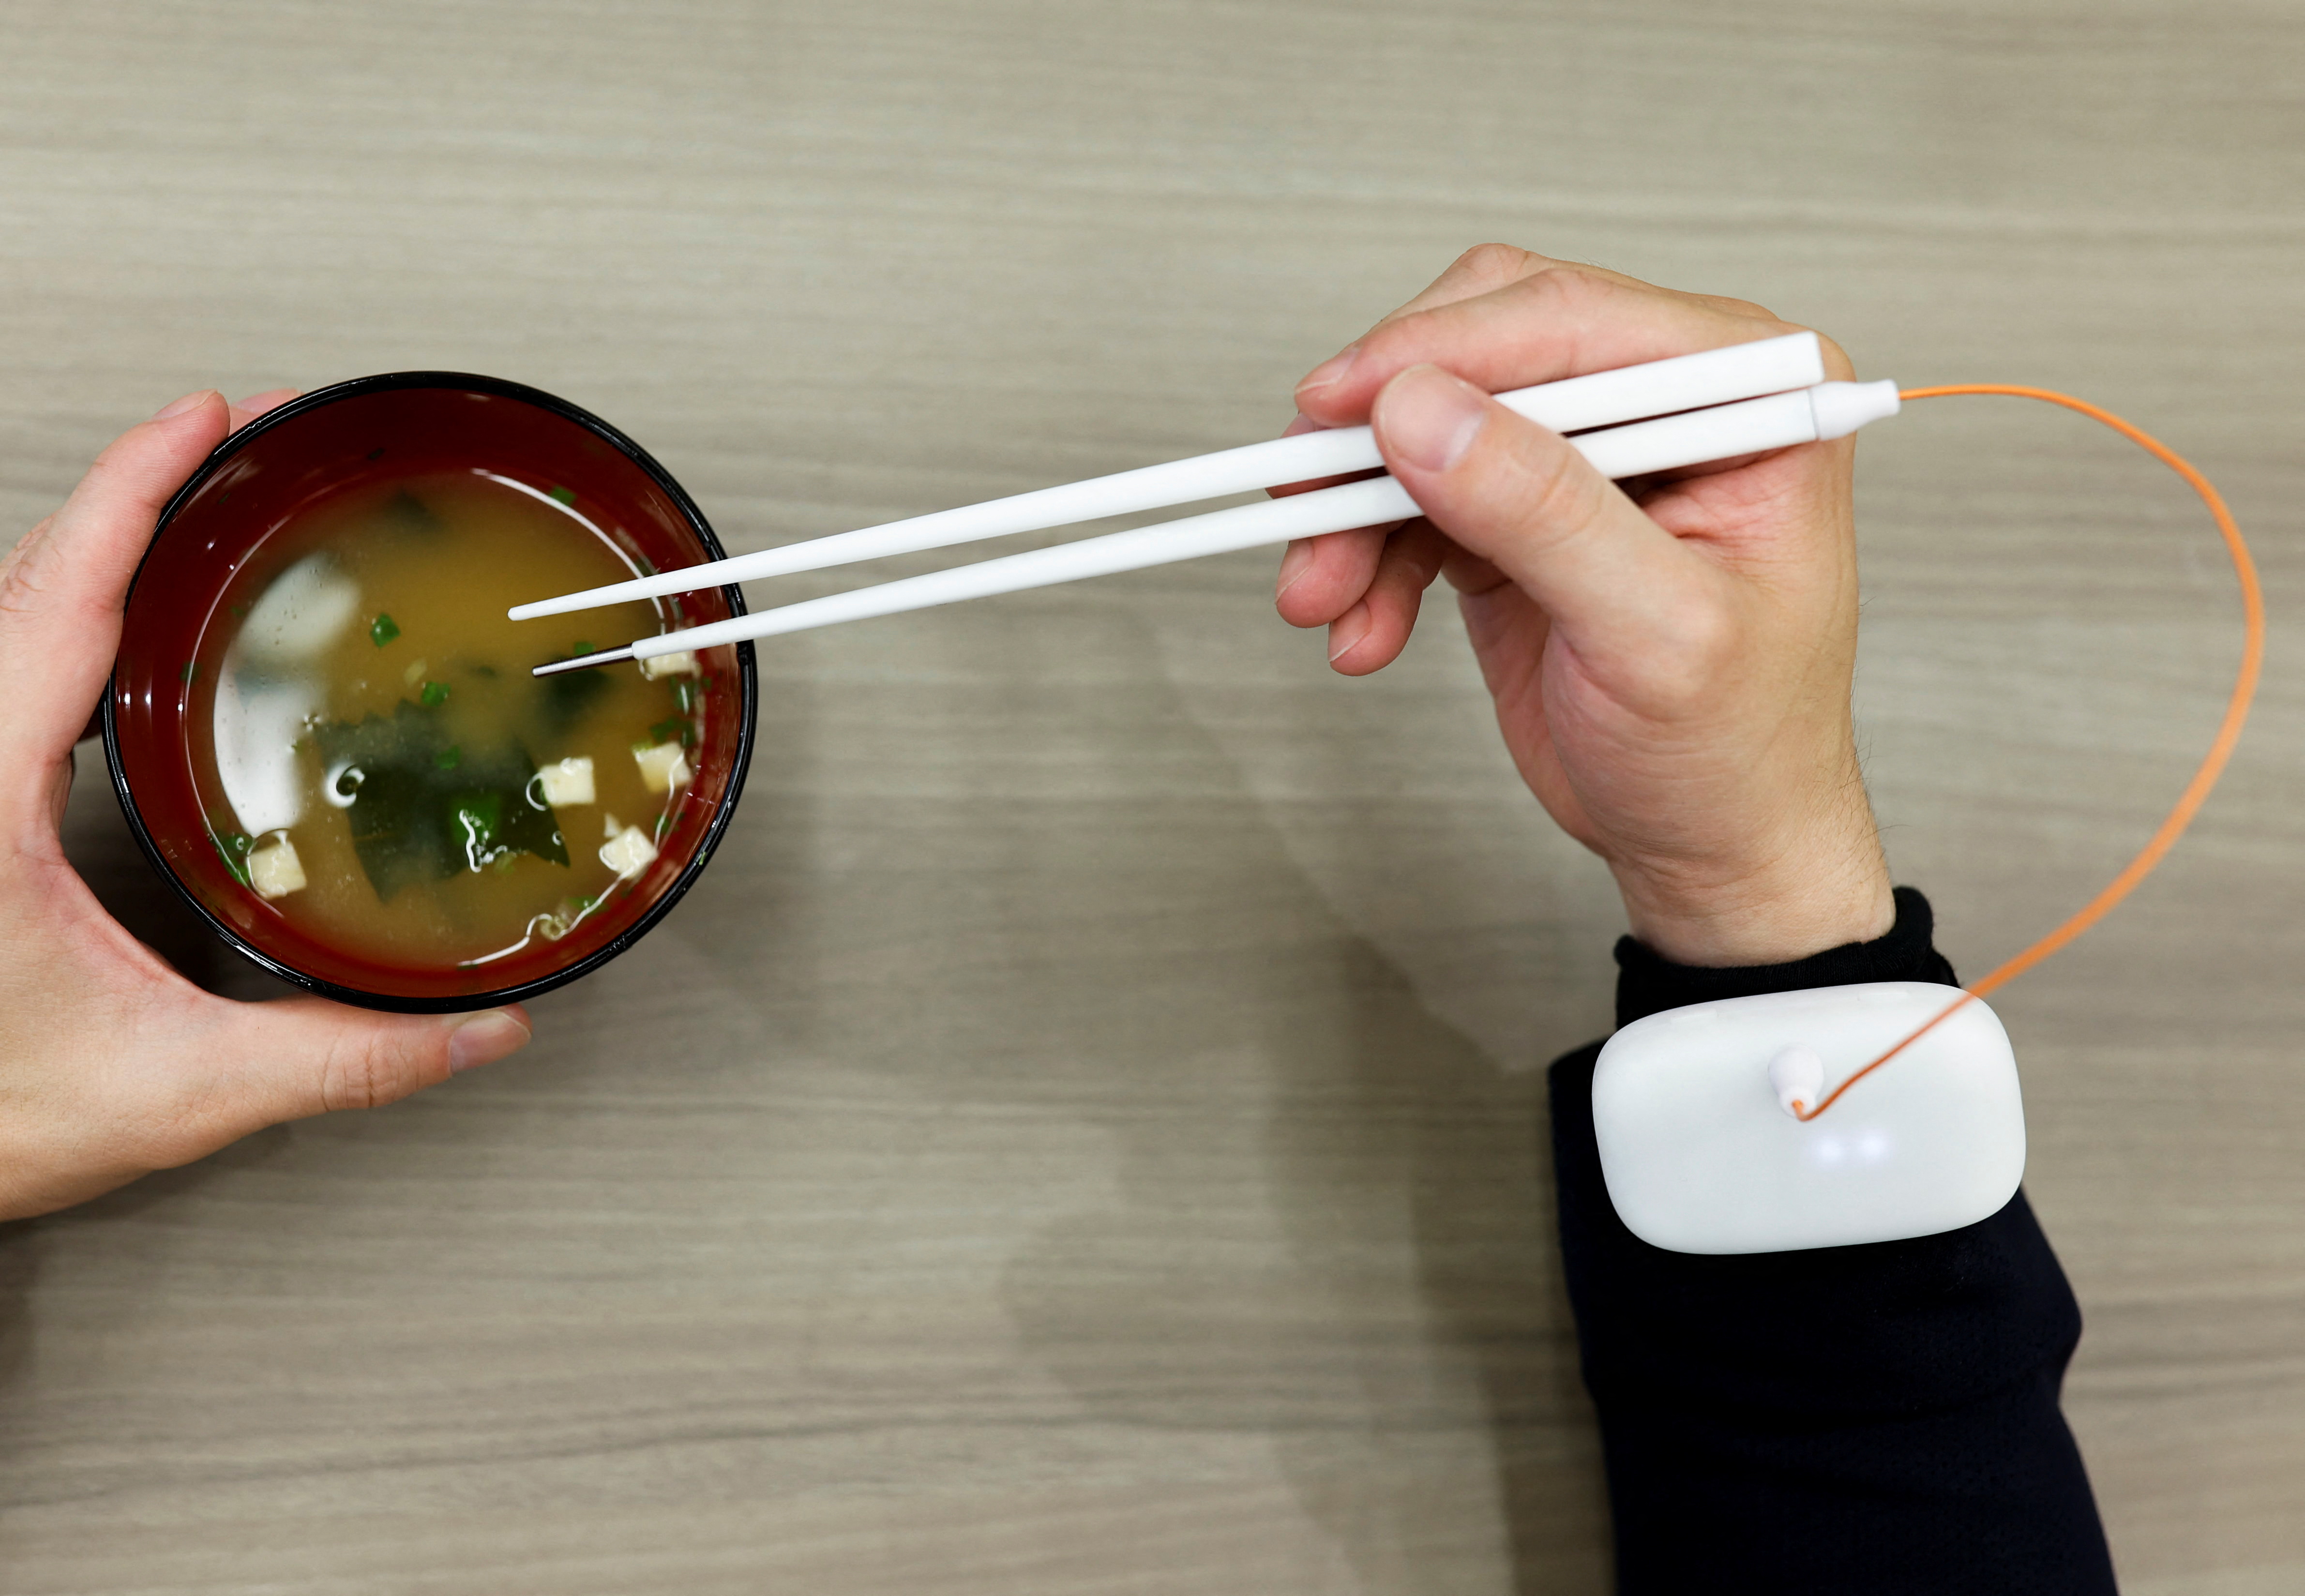 An employee of Kirin Holdings demonstrates chopsticks that can enchance food taste using an electrical stimulation waveform in Tokyo